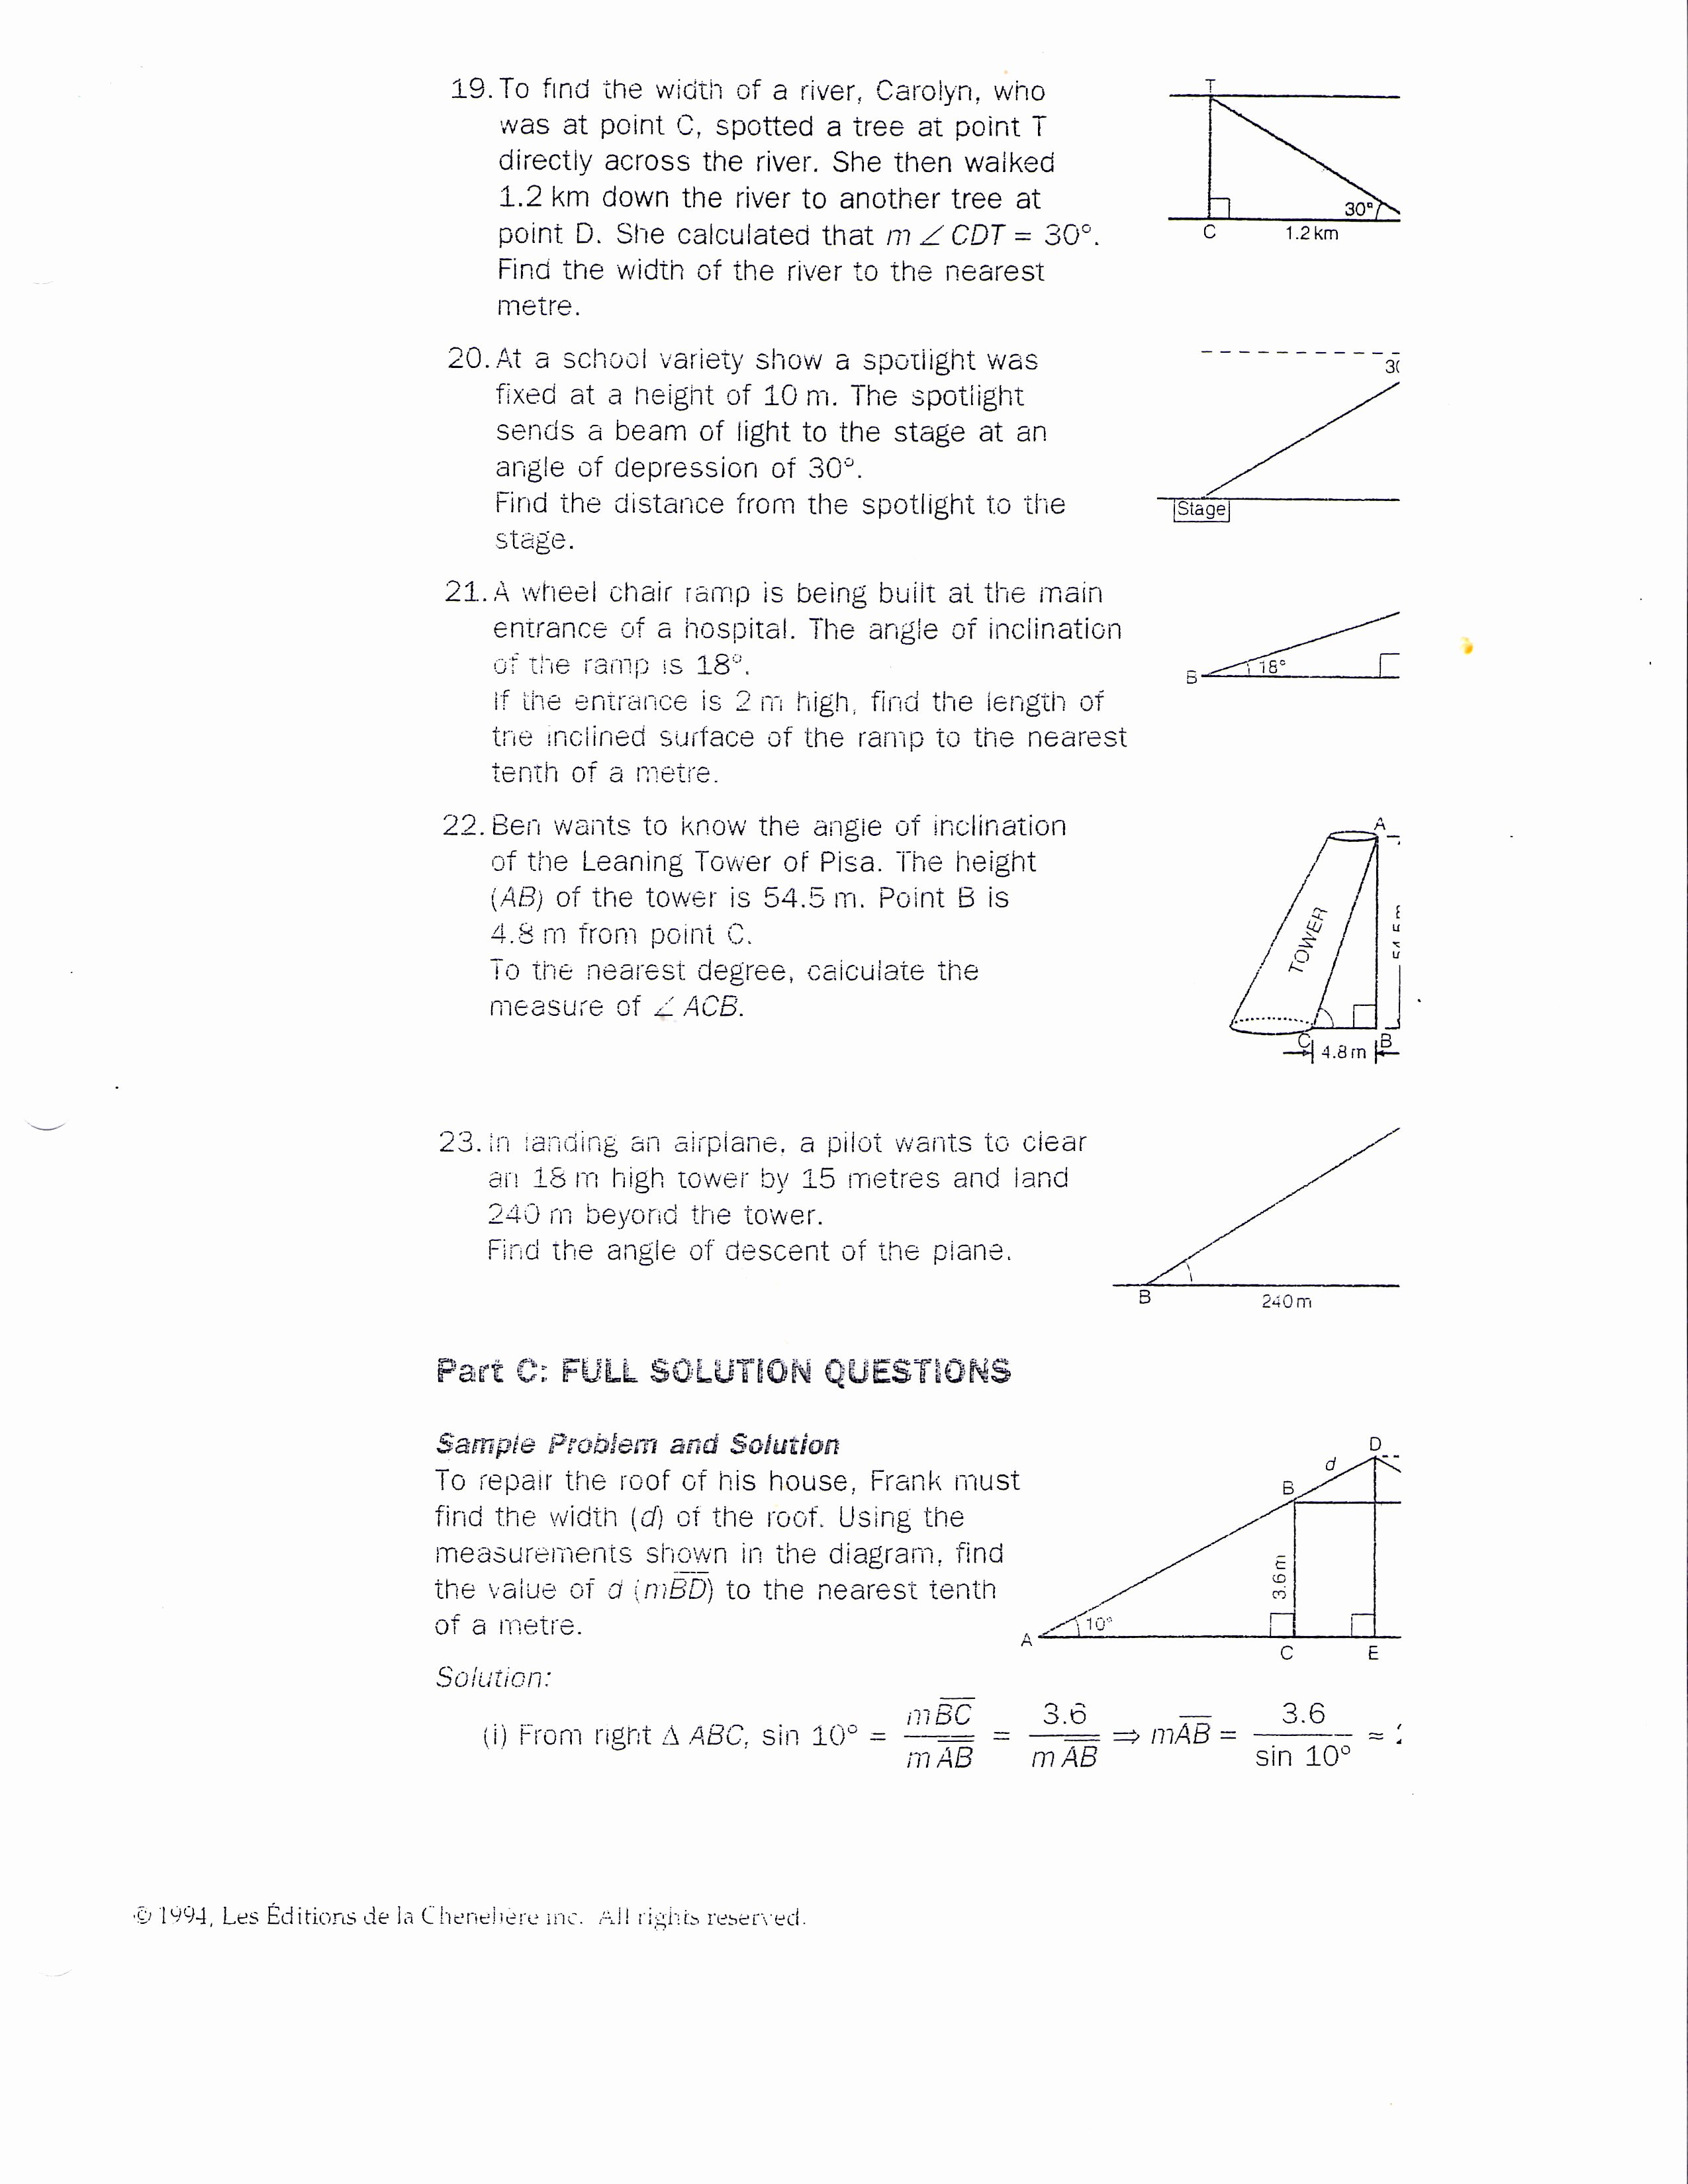 Trigonometry Word Problems Worksheet Best Of Mrsmartinmath [licensed for Non Mercial Use Only